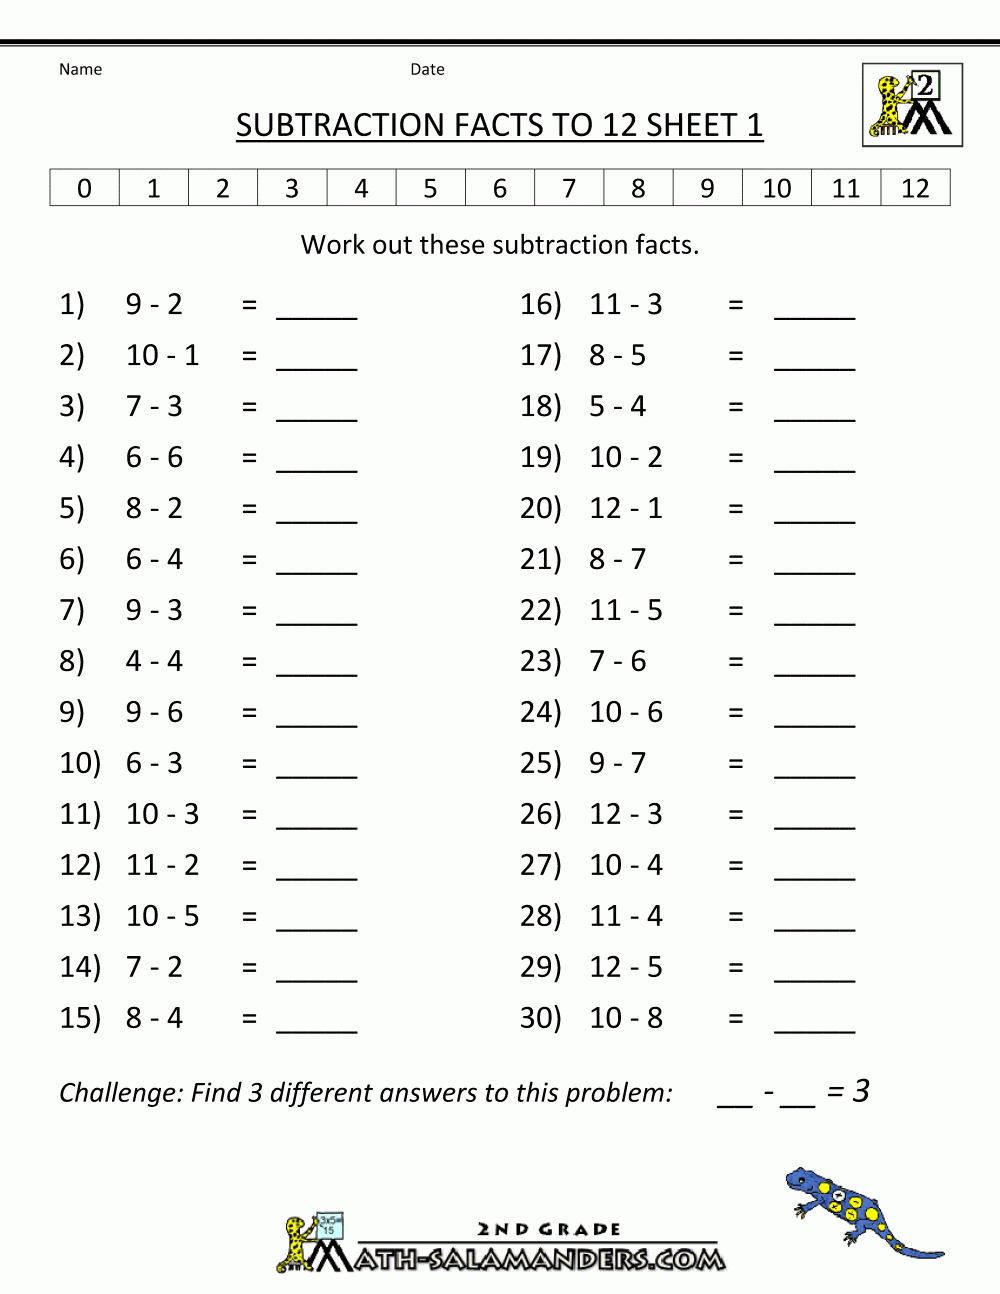 Free Subtraction Worksheets To 12 - Free Printable Addition And Subtraction Worksheets